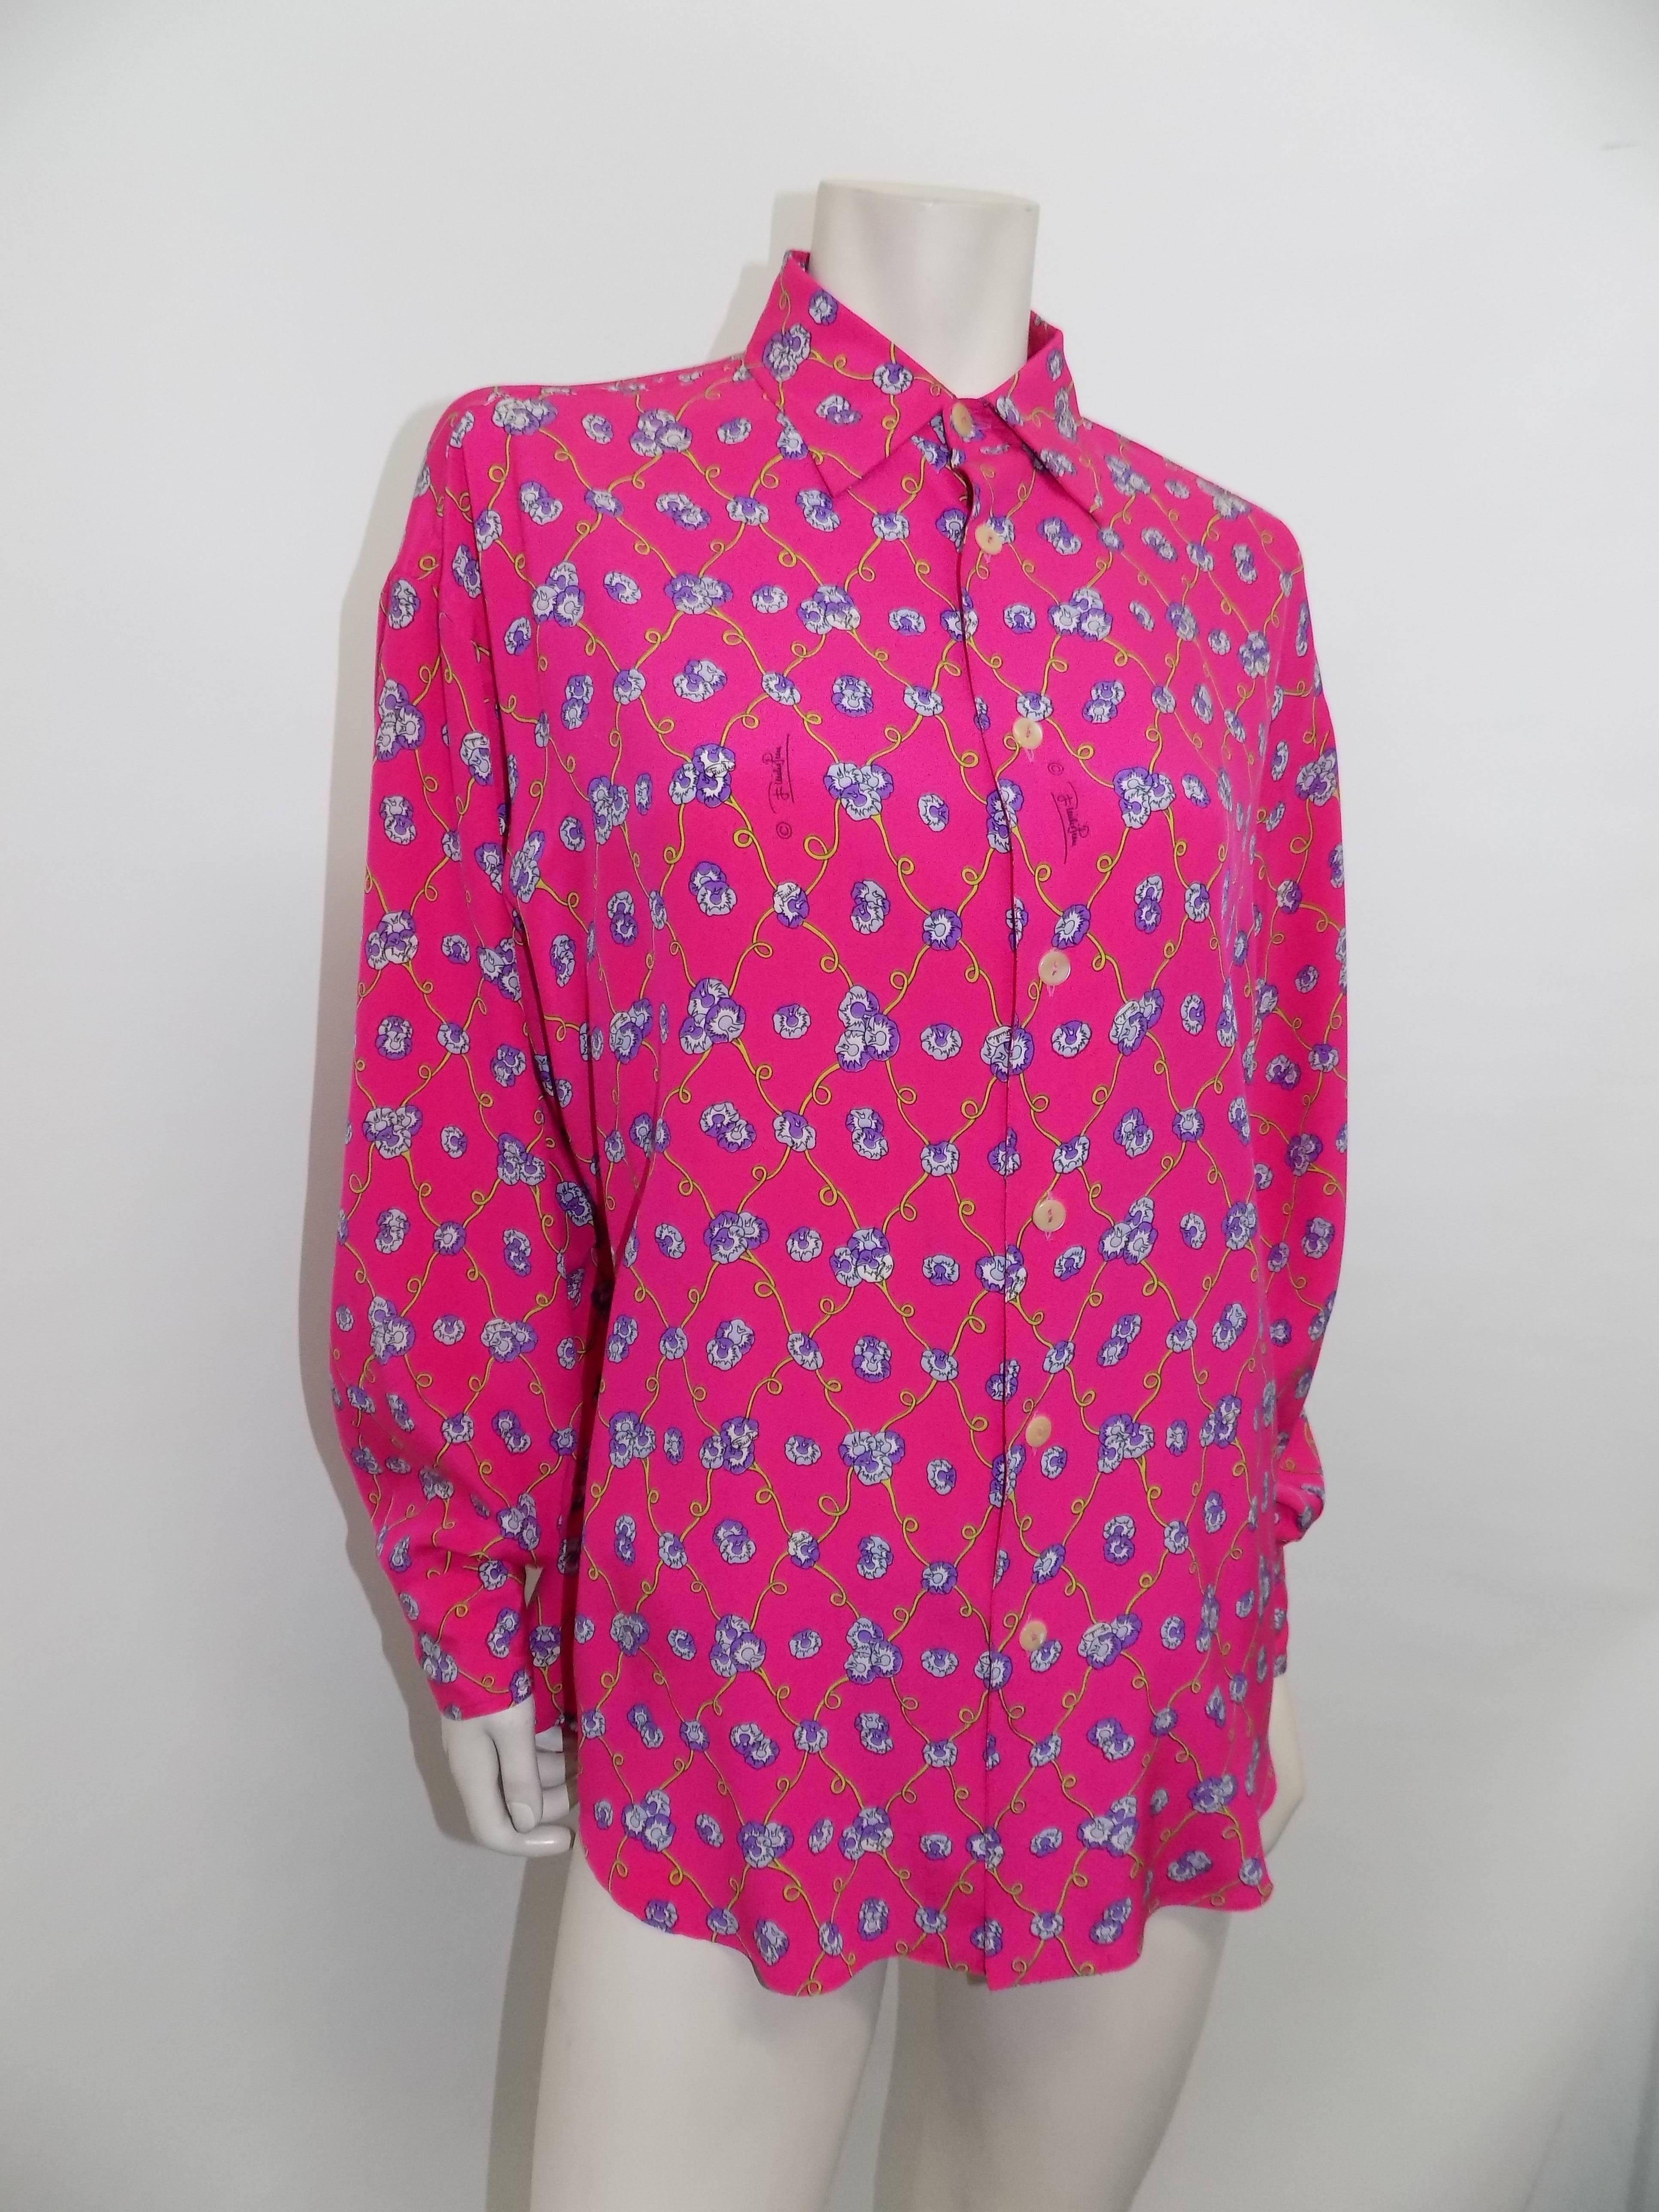 Fabulous Hot Pink with yellow and purple "orchids" flower  print. Emilio signature inside of the flower clusters. . Button front closure. Boy collar. Made in Italy. Circa 1970's. Mint condition. Great color for summer.
.Bust 48"